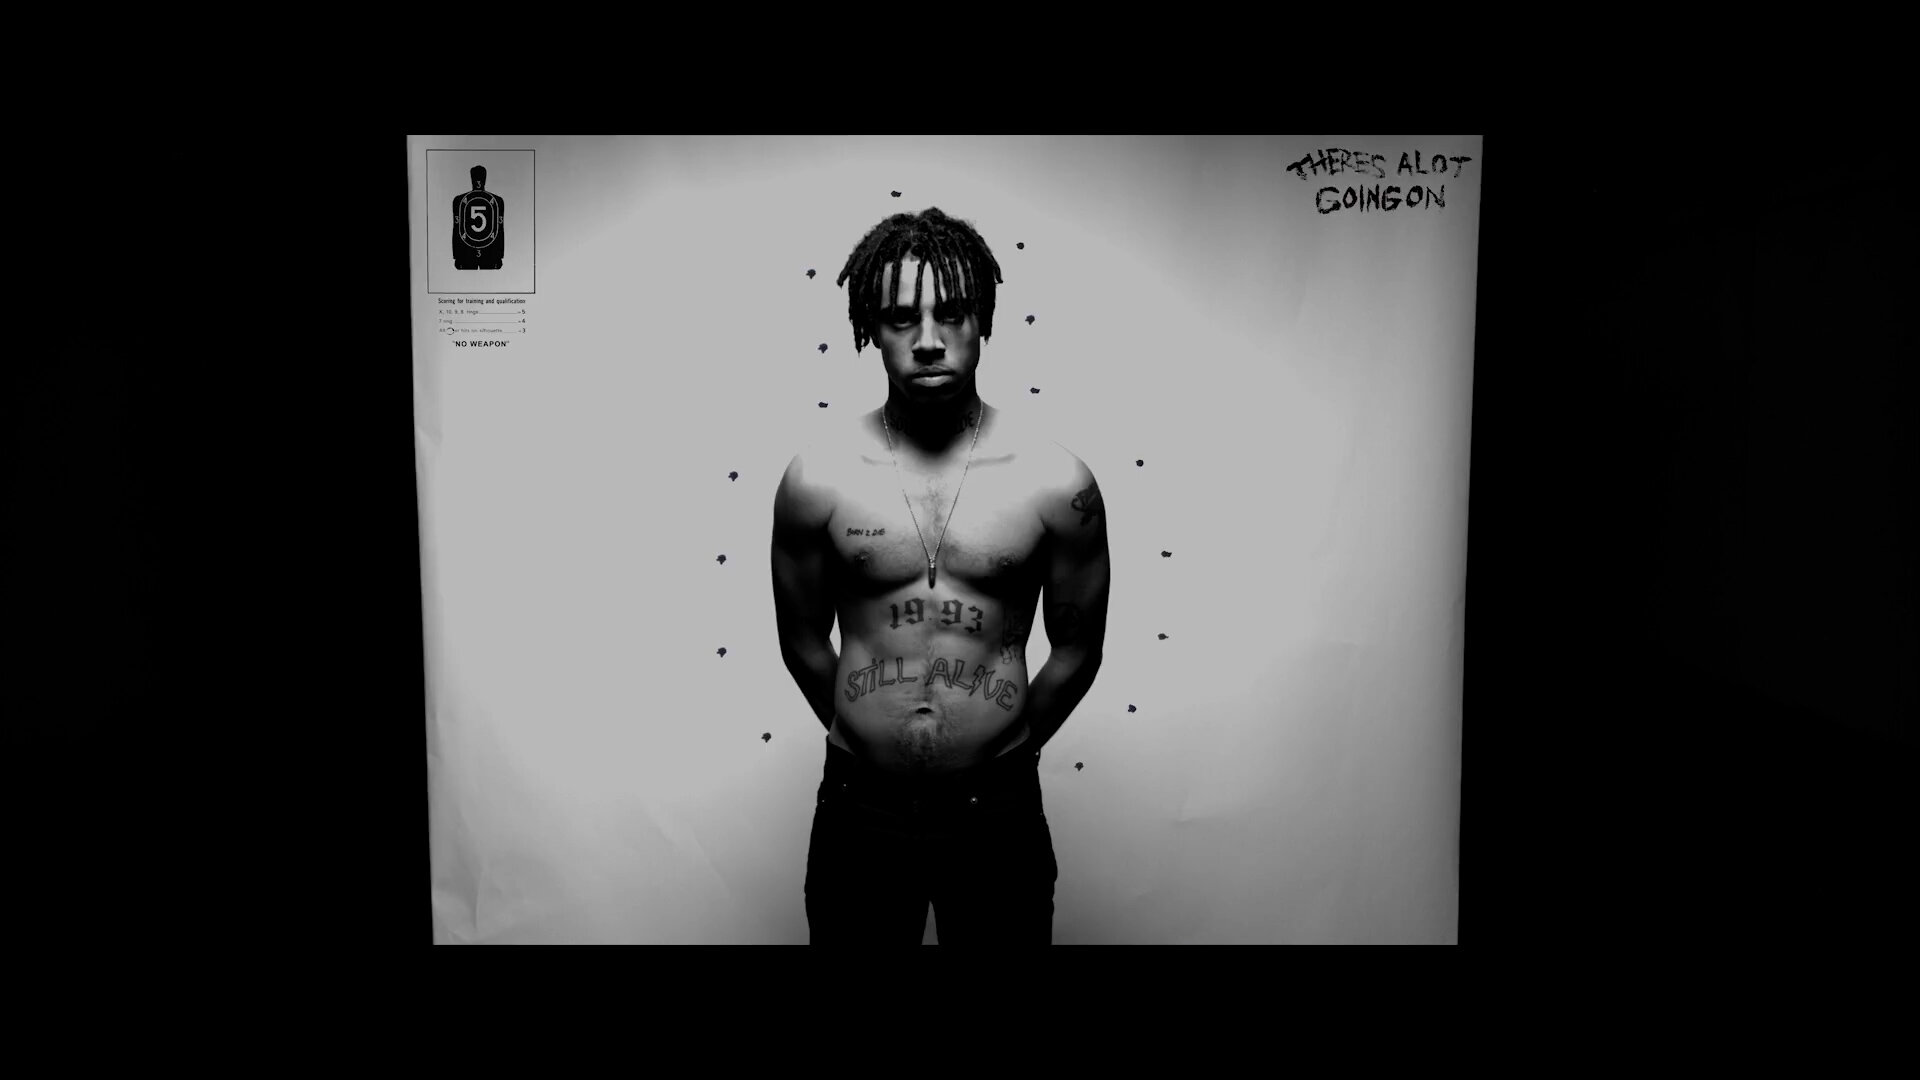 Vic Mensa - There's A Lot Going On